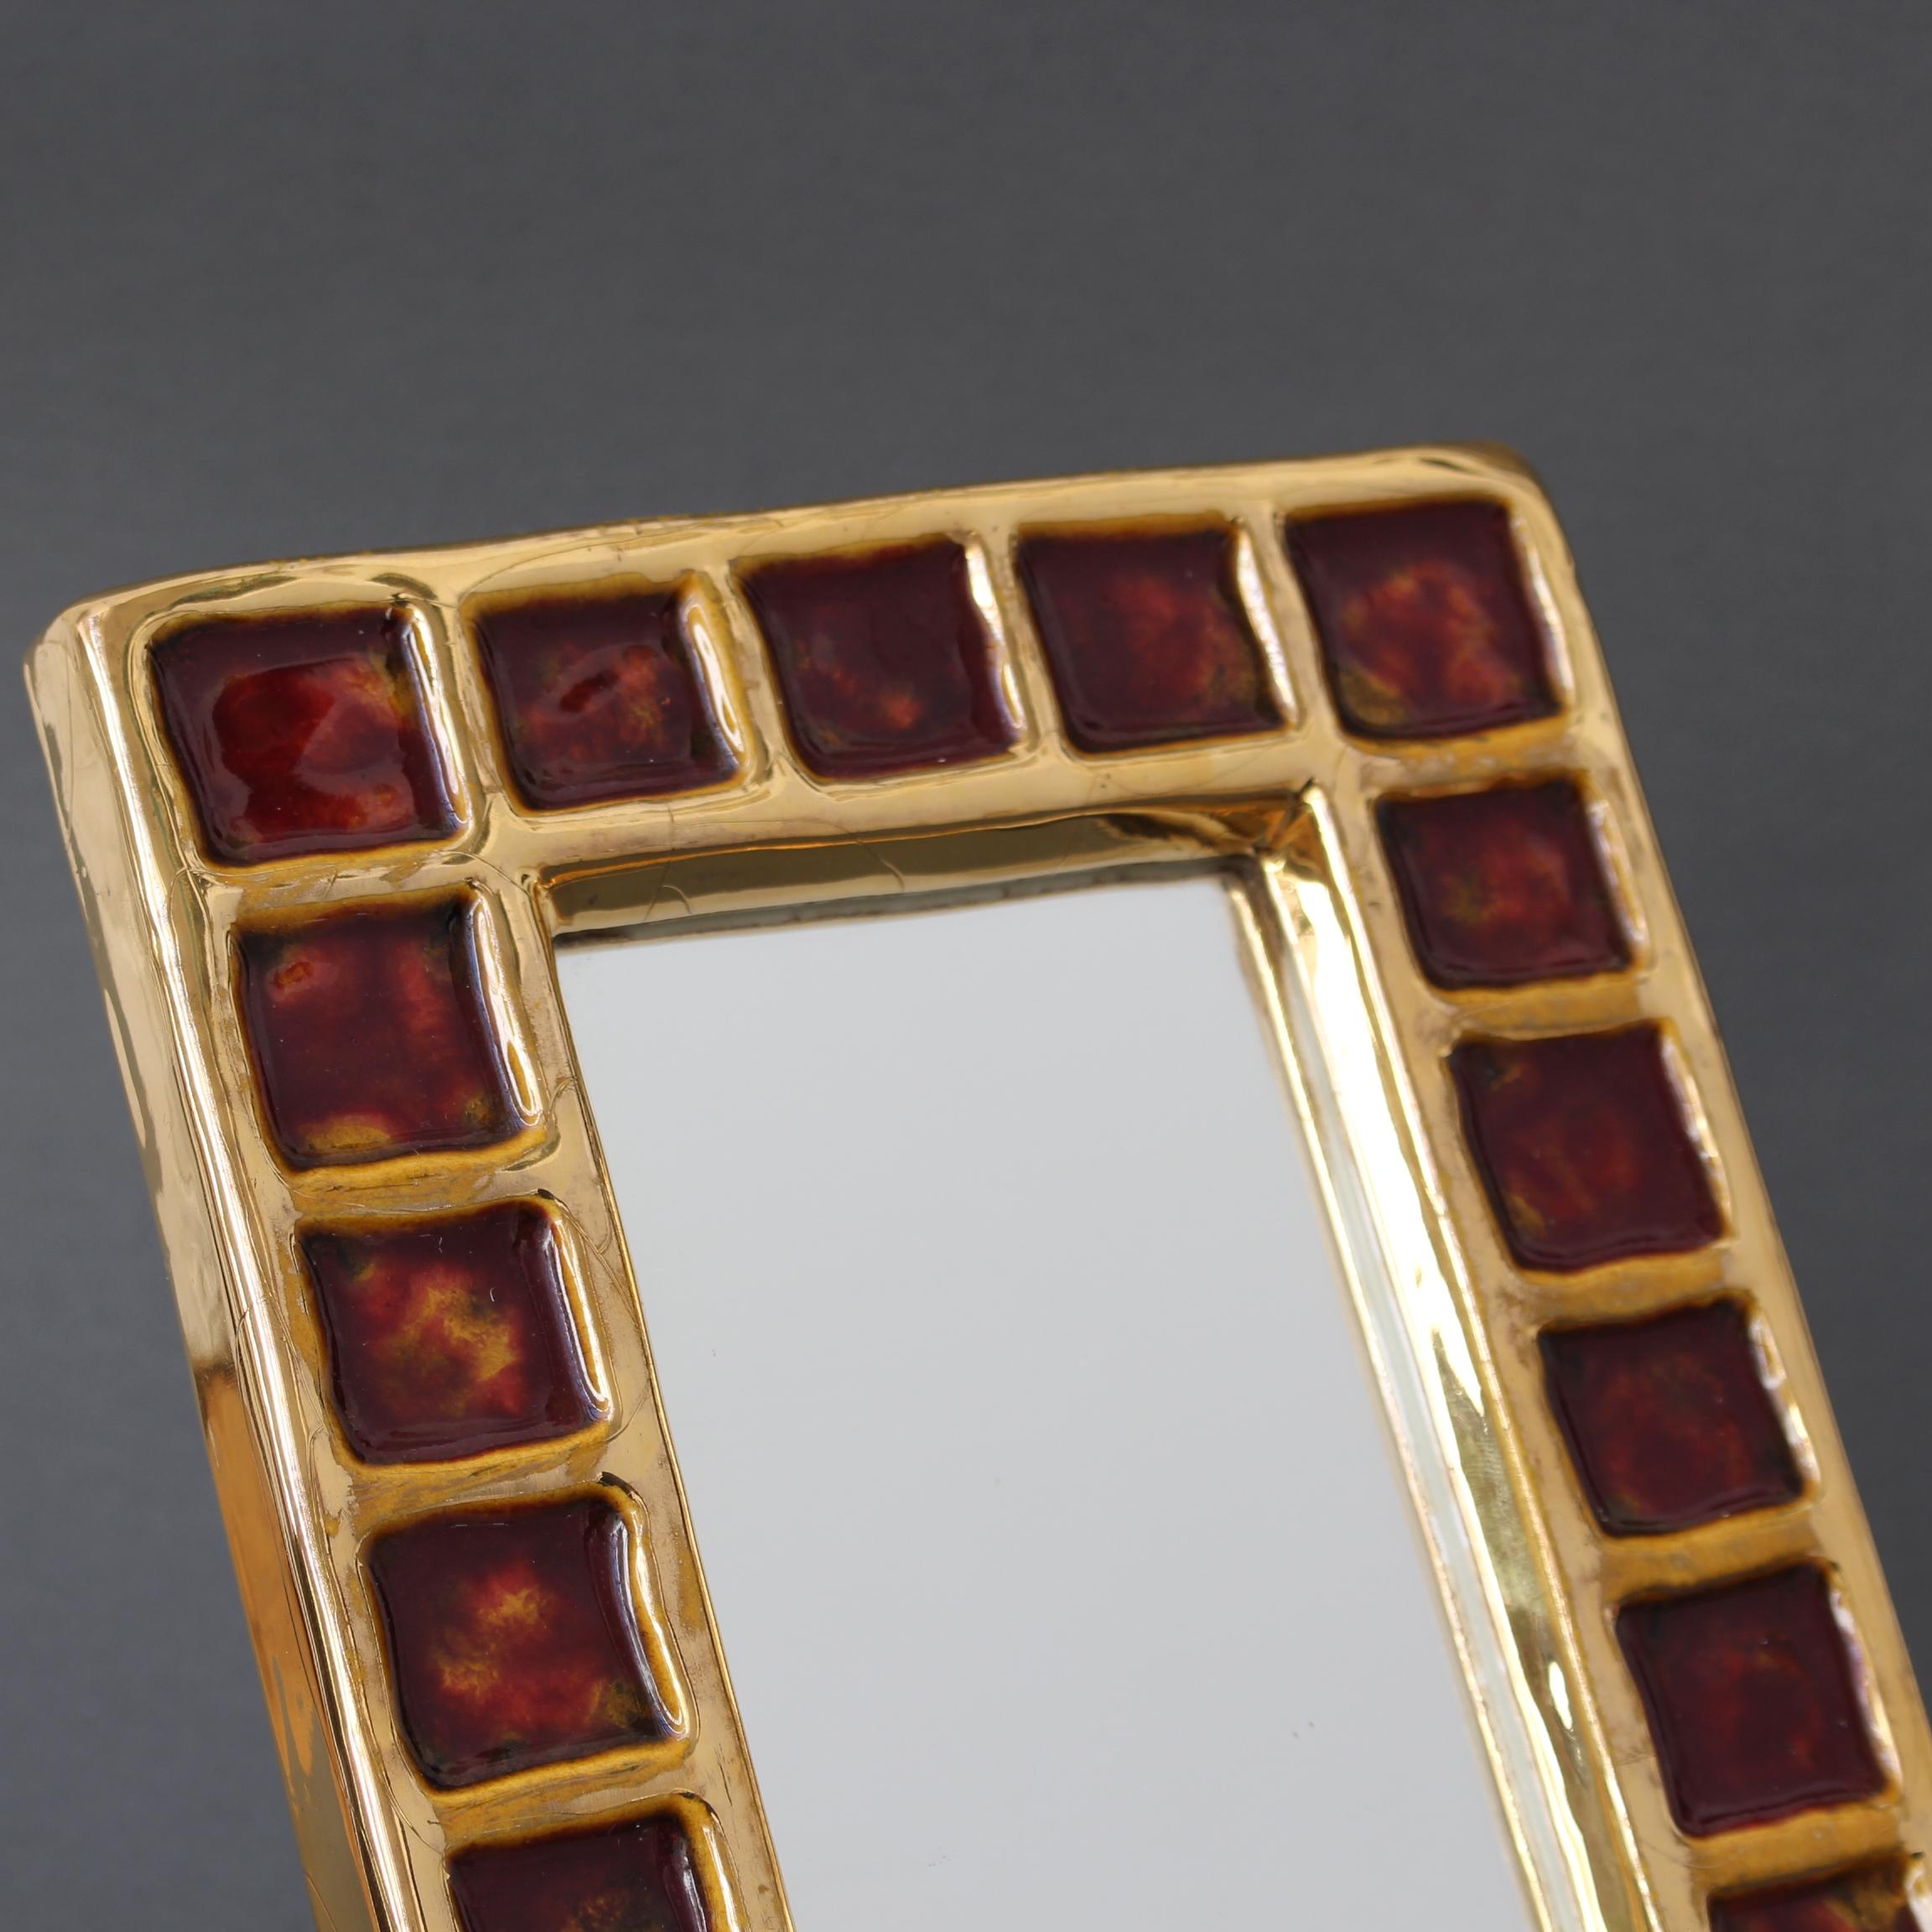 Vintage French Ceramic Mirror by François Lembo (circa 1970s) For Sale 6